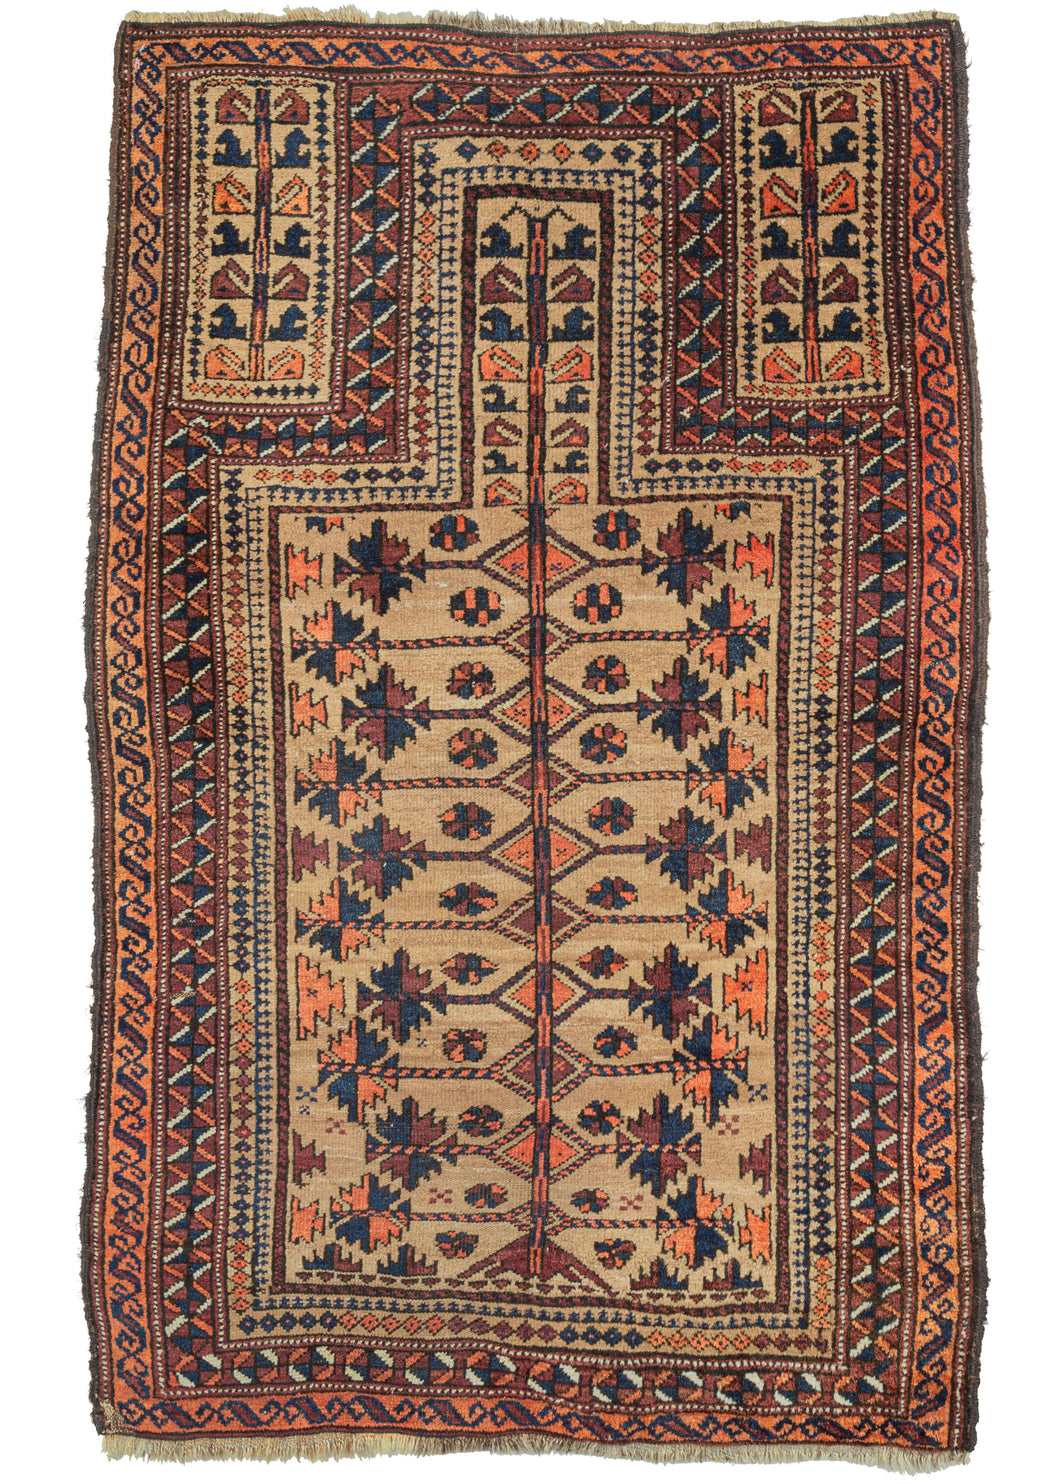 Antique Prayer Baluch rug composed of a directional prayer niche with a tree-of-life central motif that fills the camel mihrab. As the mihrab narrows boteh like shapes can be found at the top of the tree. The same motif can be found on the two smaller trees flanking the top of the mihrab. Navy, orange, purplish brown and ivory liven up the composition.